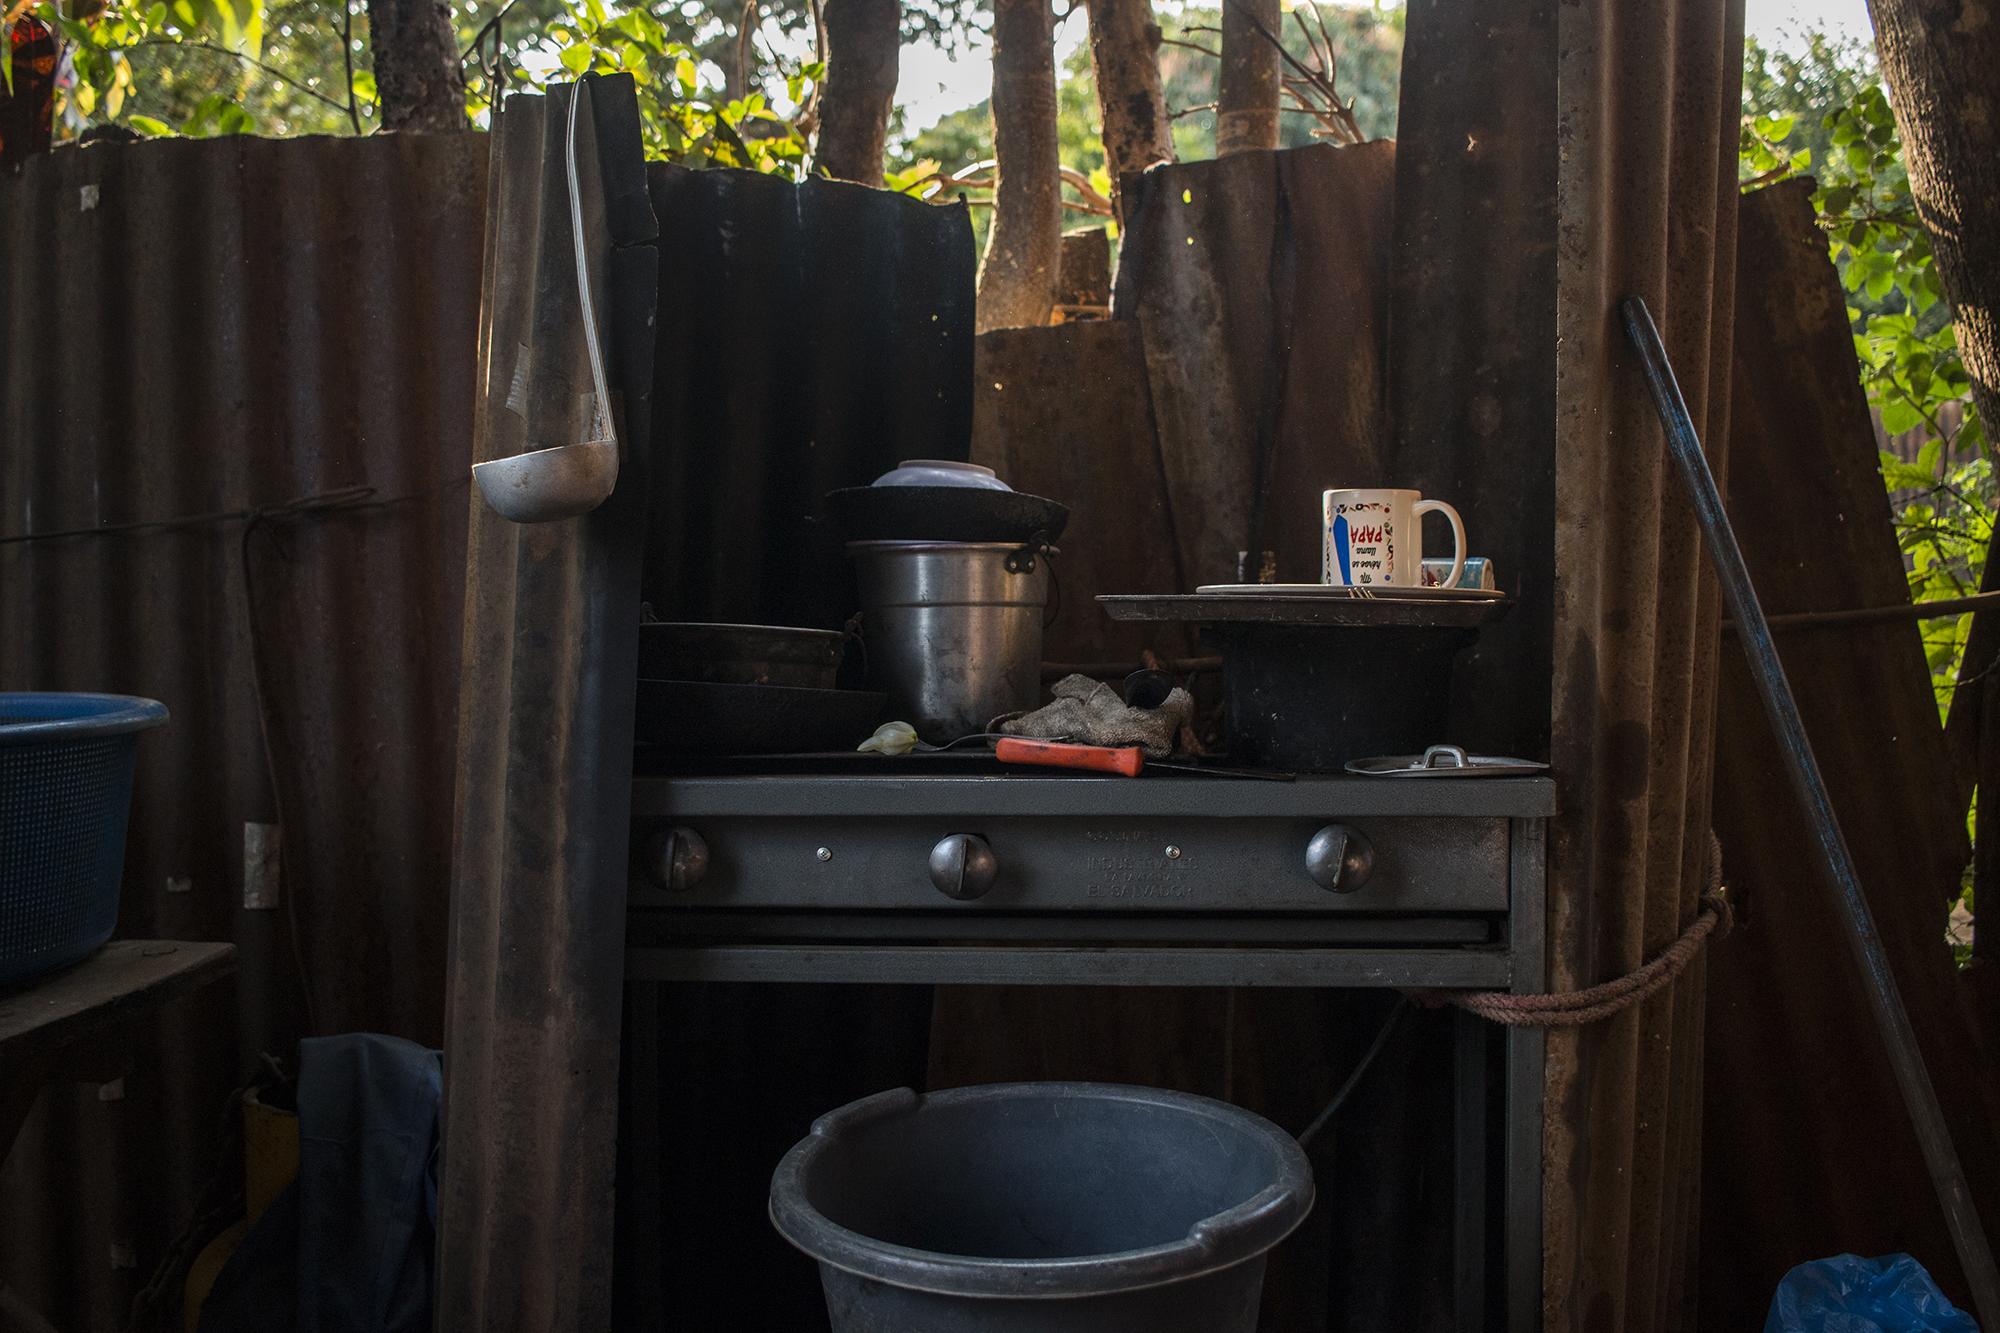 The grill where Fátima Pérez cooked pupusas. She is now in prison awaiting her trial for allegedly promoting human trafficking. Photo: Víctor Peña/El Faro